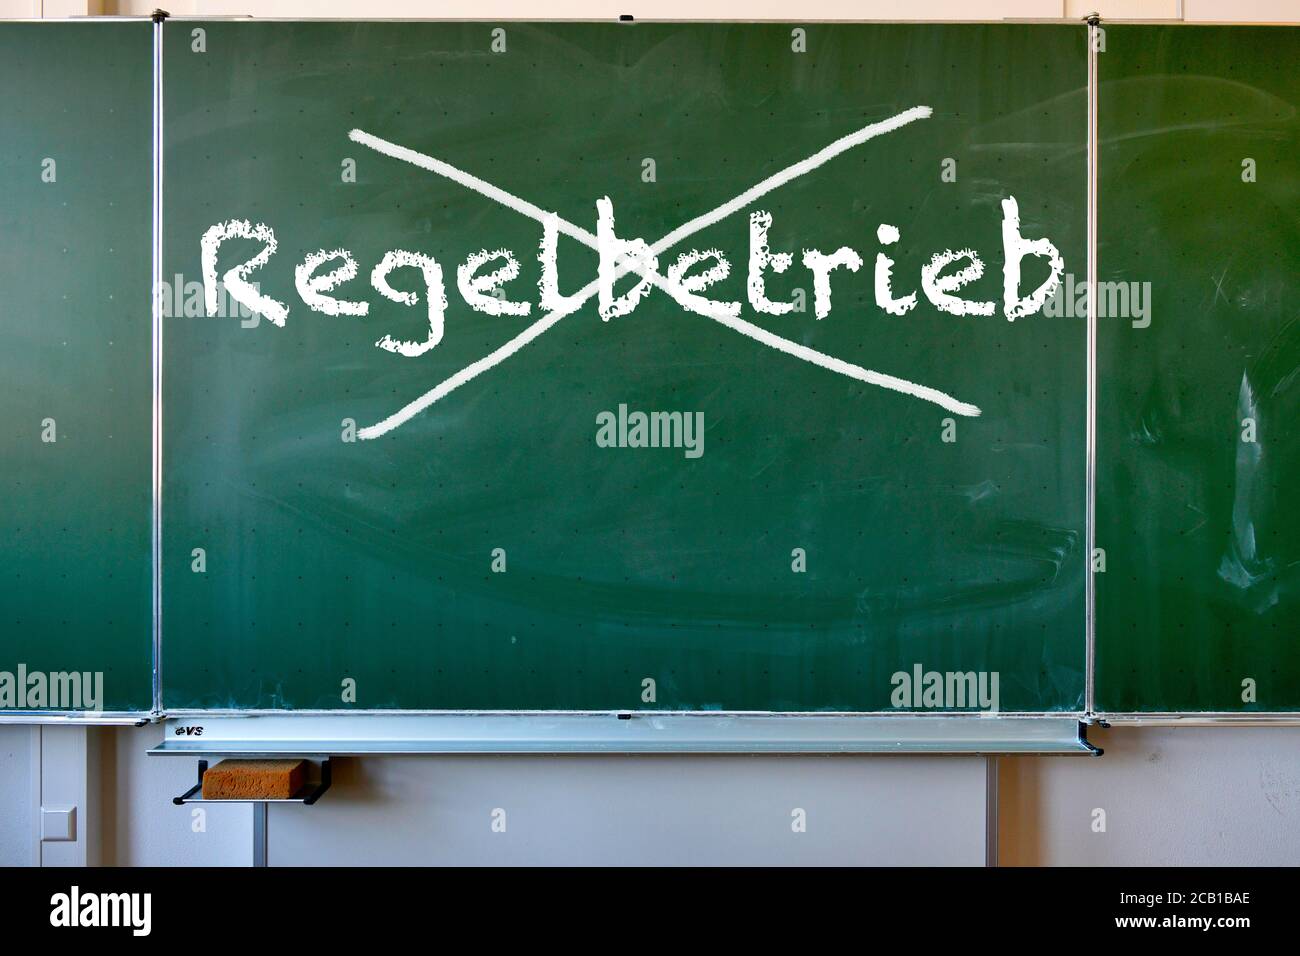 No restart of school in regular operation after the summer holidays, Corona crisis, Germany Stock Photo